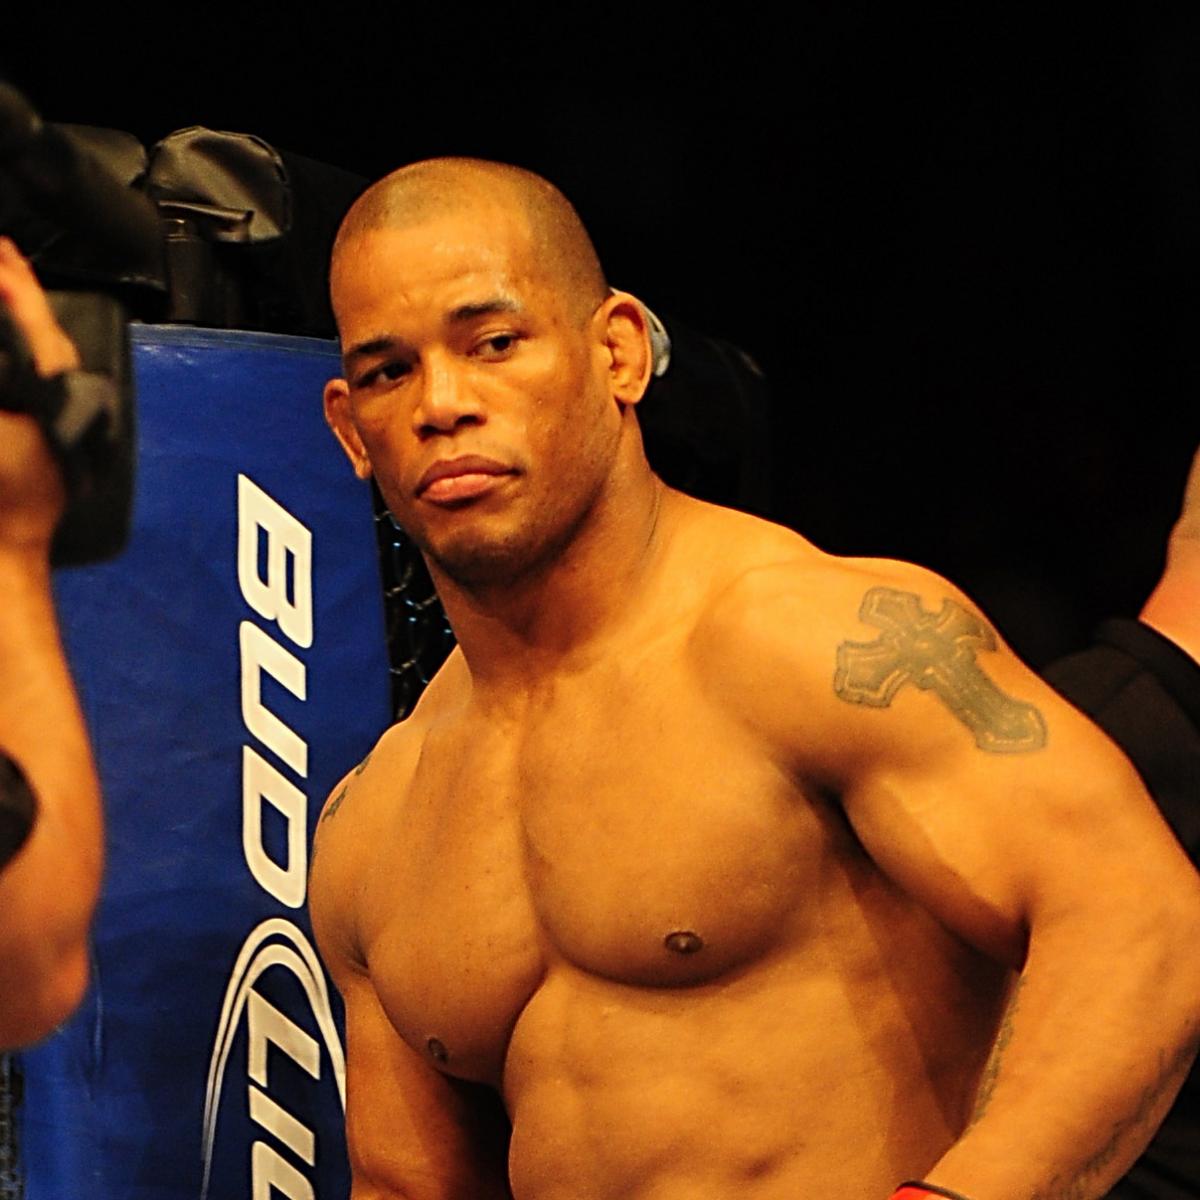 Over a Million Dollars into His Deal, Is Hector Lombard Close to the Cut Line ...1200 x 1200